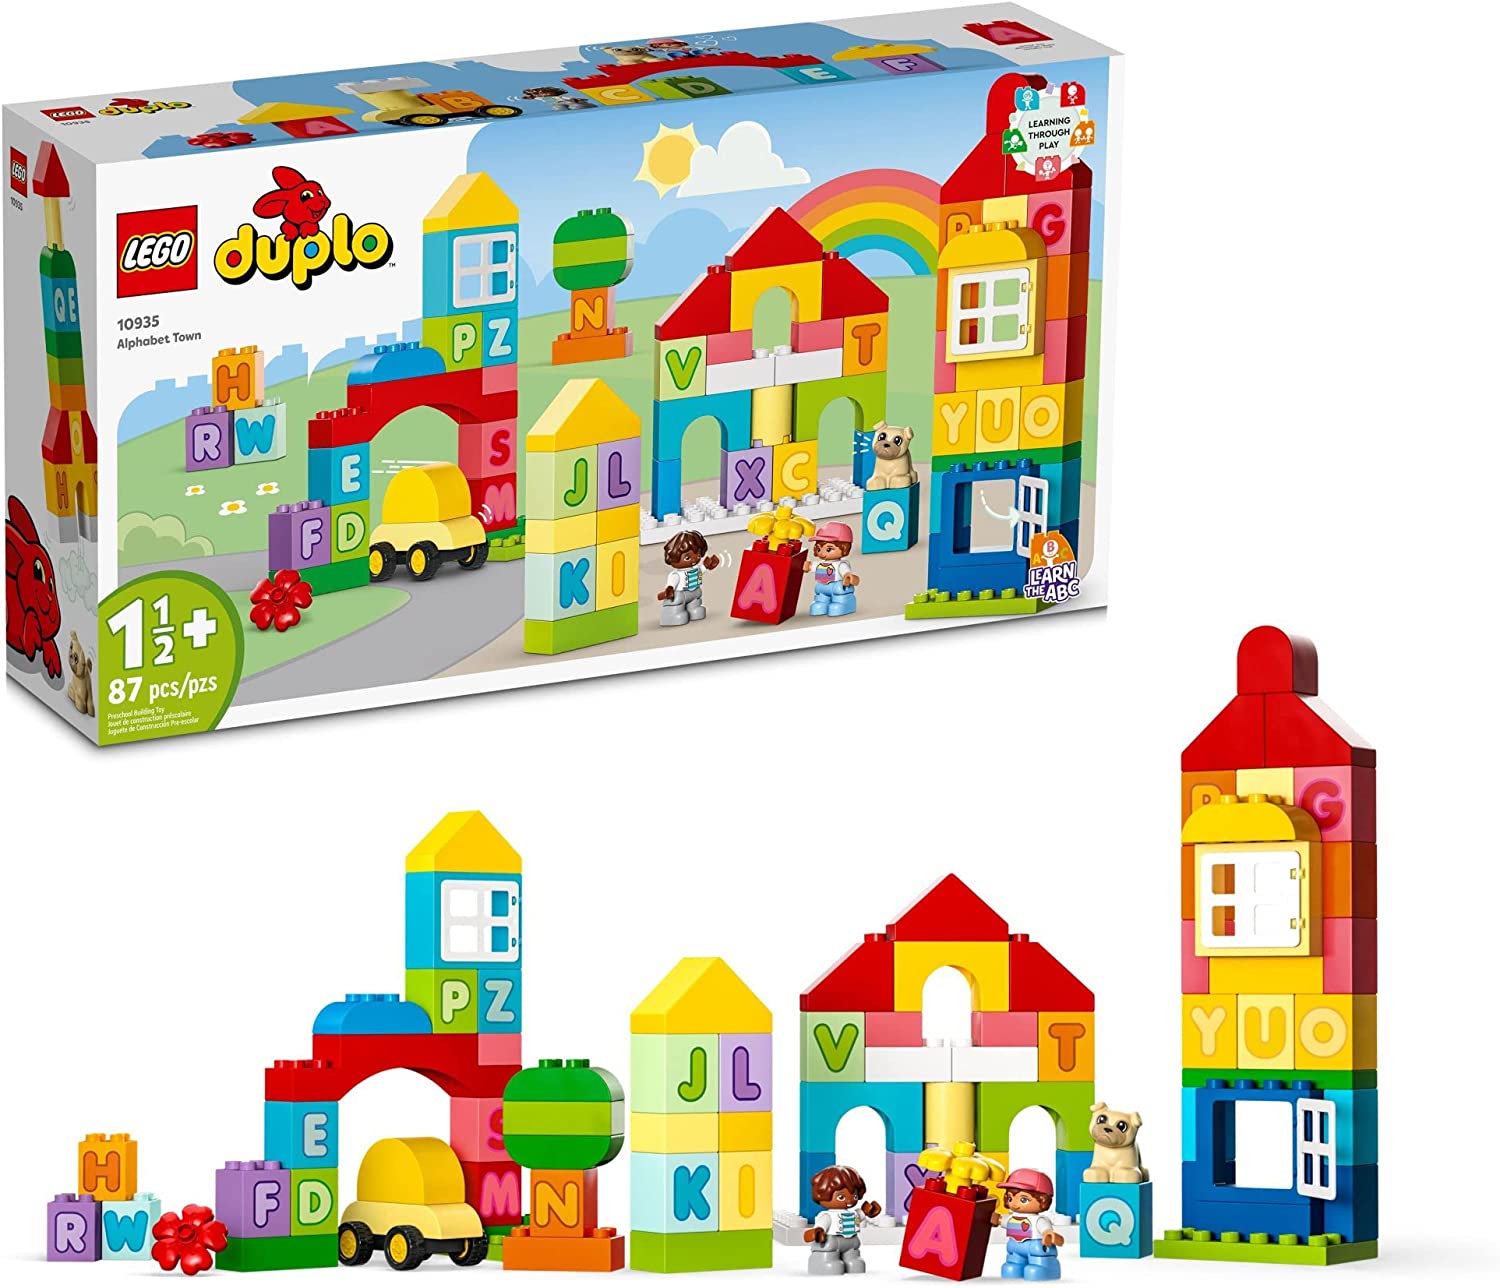 LEGO DUPLO Town Dream Playground 10991 Building Toy Set for Toddlers, Boys  and Girls, Hands-on STEM Learning About Letters and Numbers Through